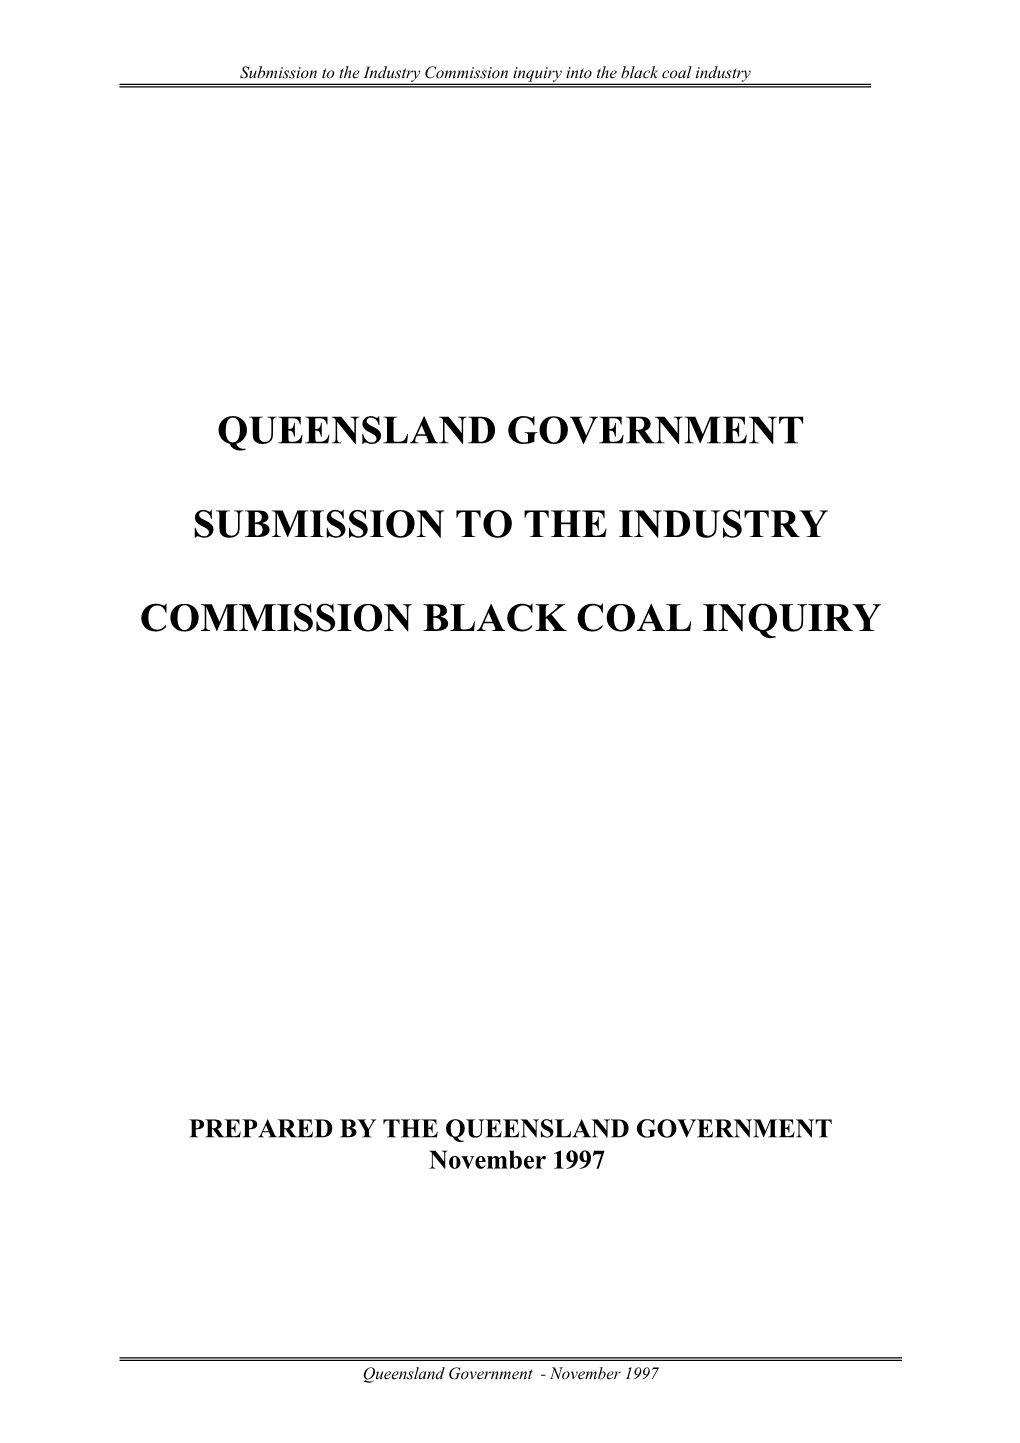 Queensland Government Submission to the Industry Commission Black